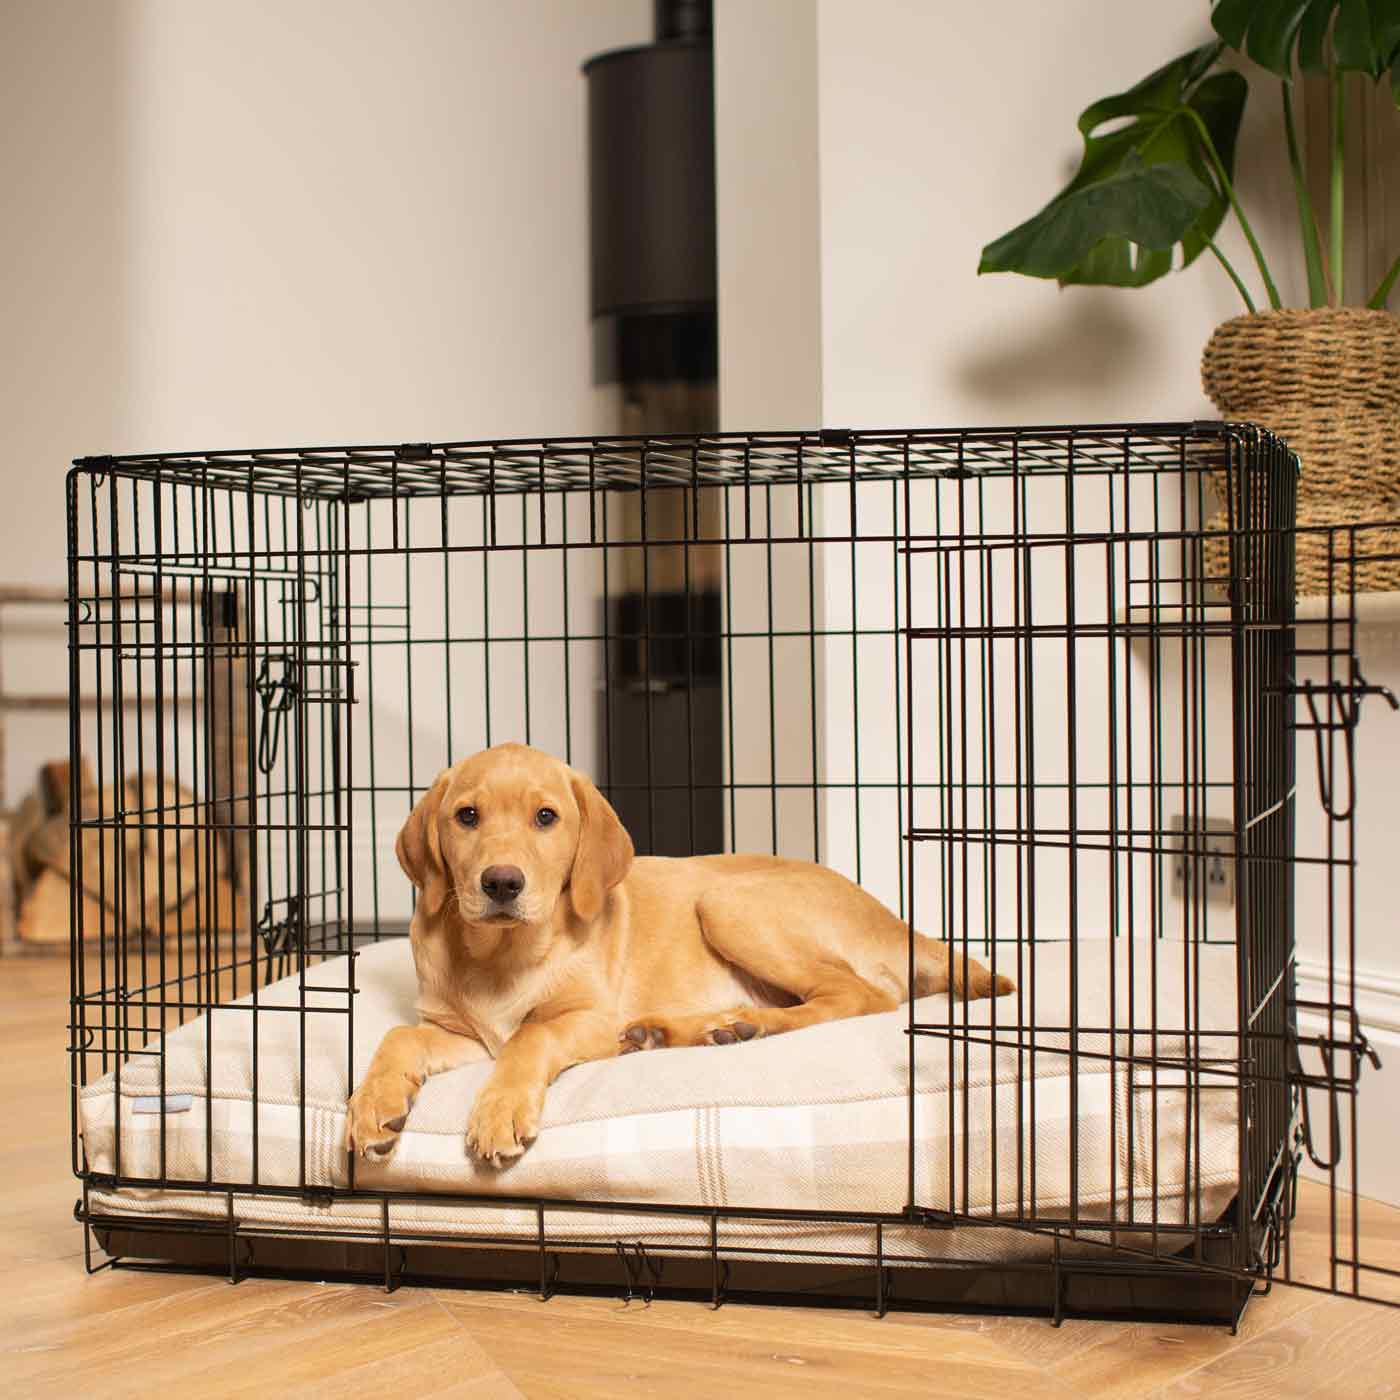 Luxury Dog Crate Cushion, Balmoral Natural Tweed Crate Cushion The Perfect Dog Crate Accessory, Available To Personalise Now at Lords & Labradors